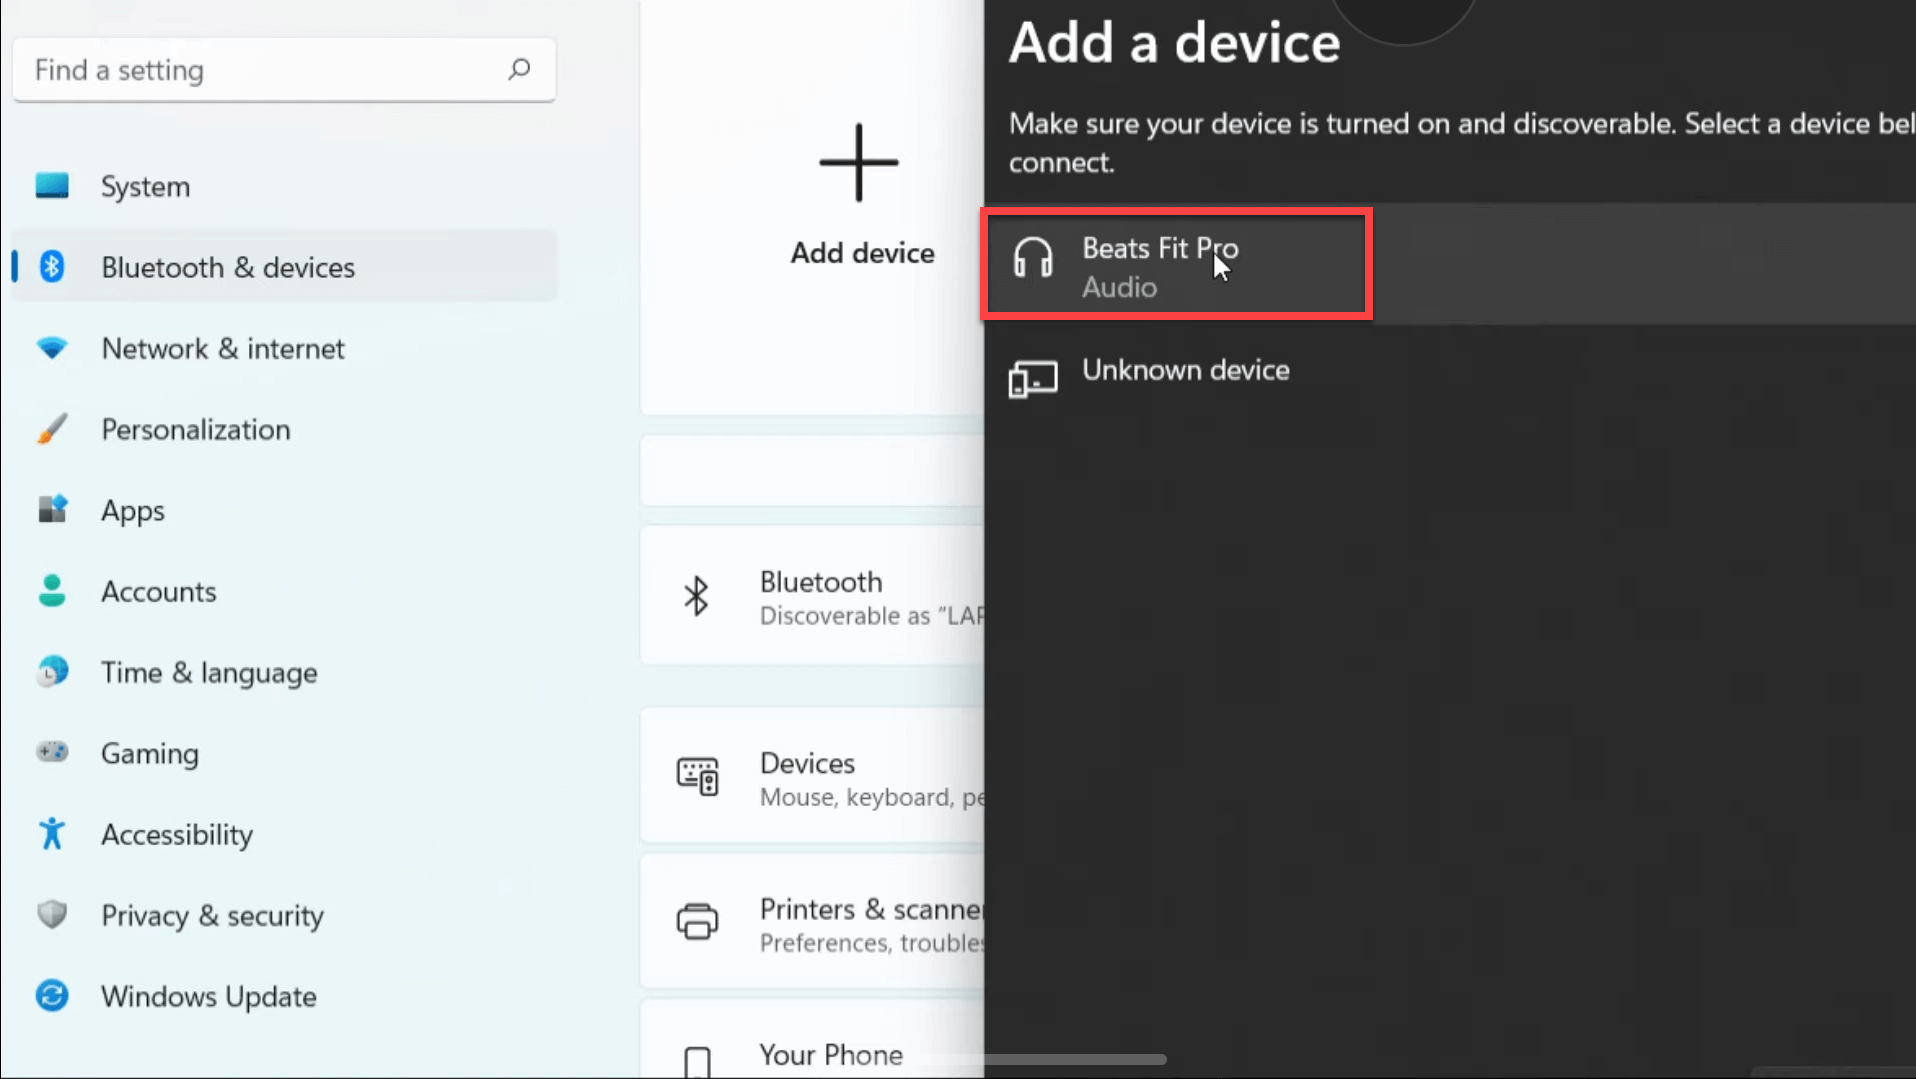 How to Connect Beats Fit Pro to a Windows 11/10 Laptop or PC